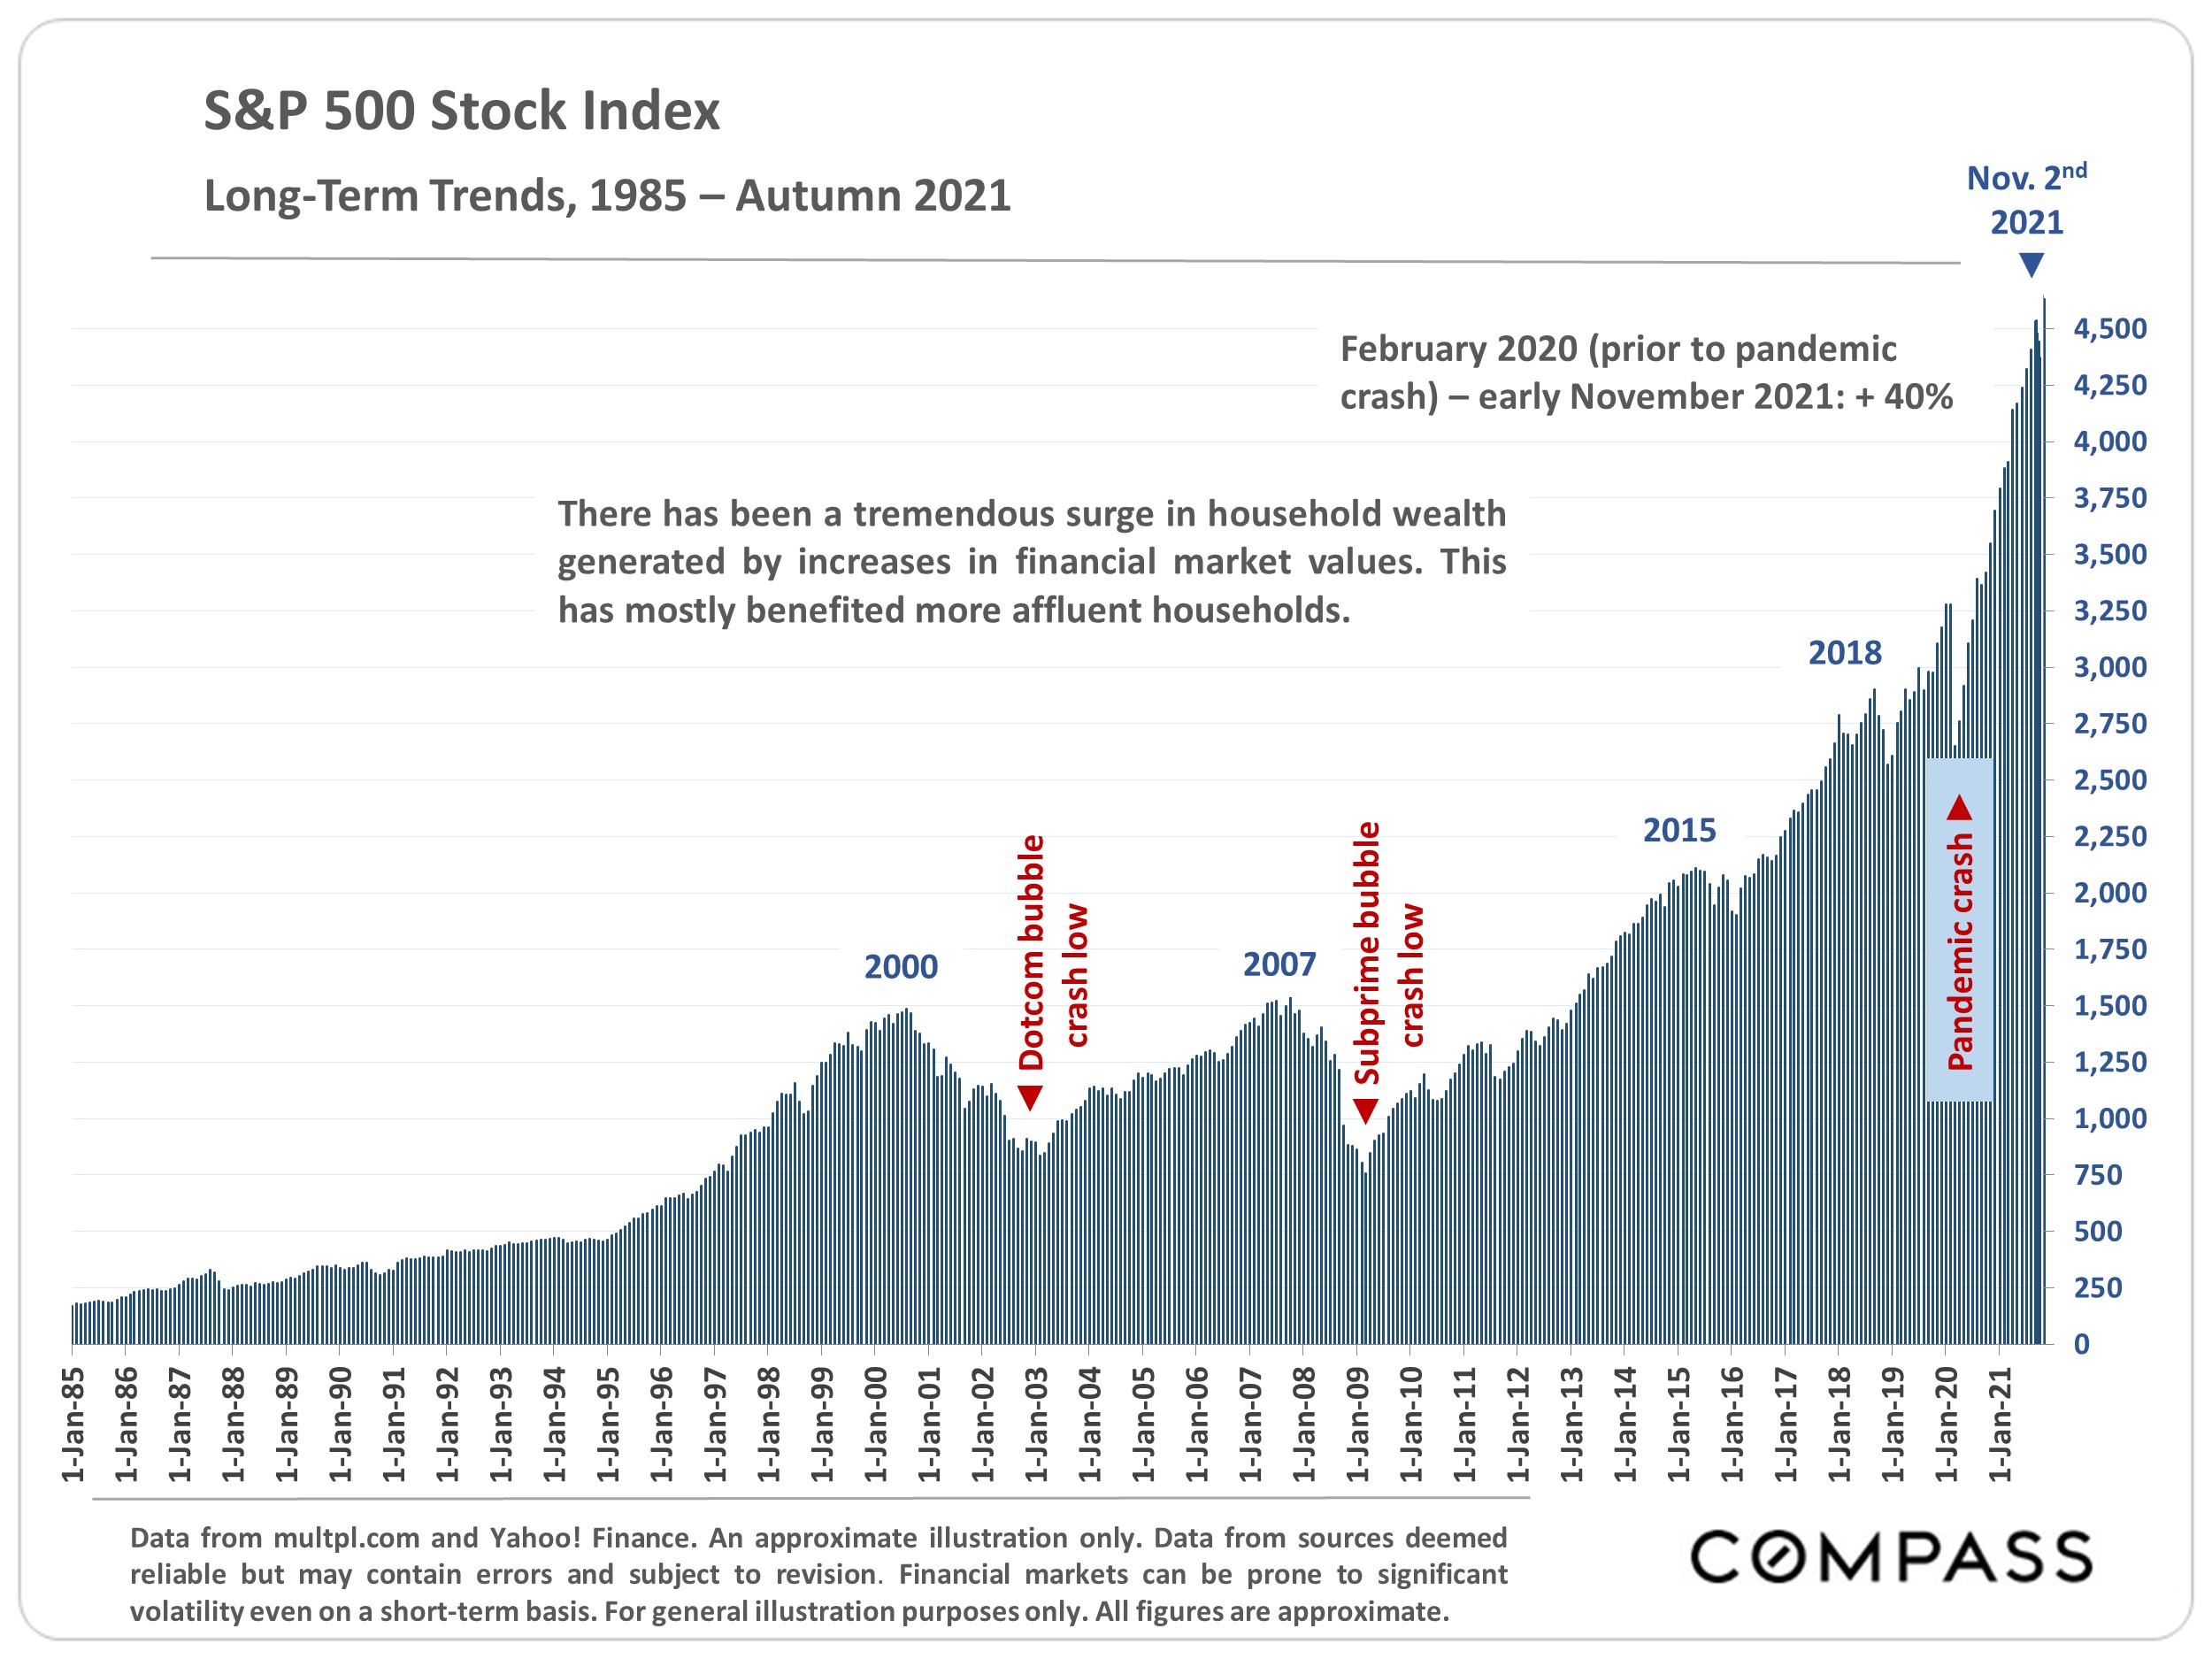 bar graph of the S&P 500 stock index trends